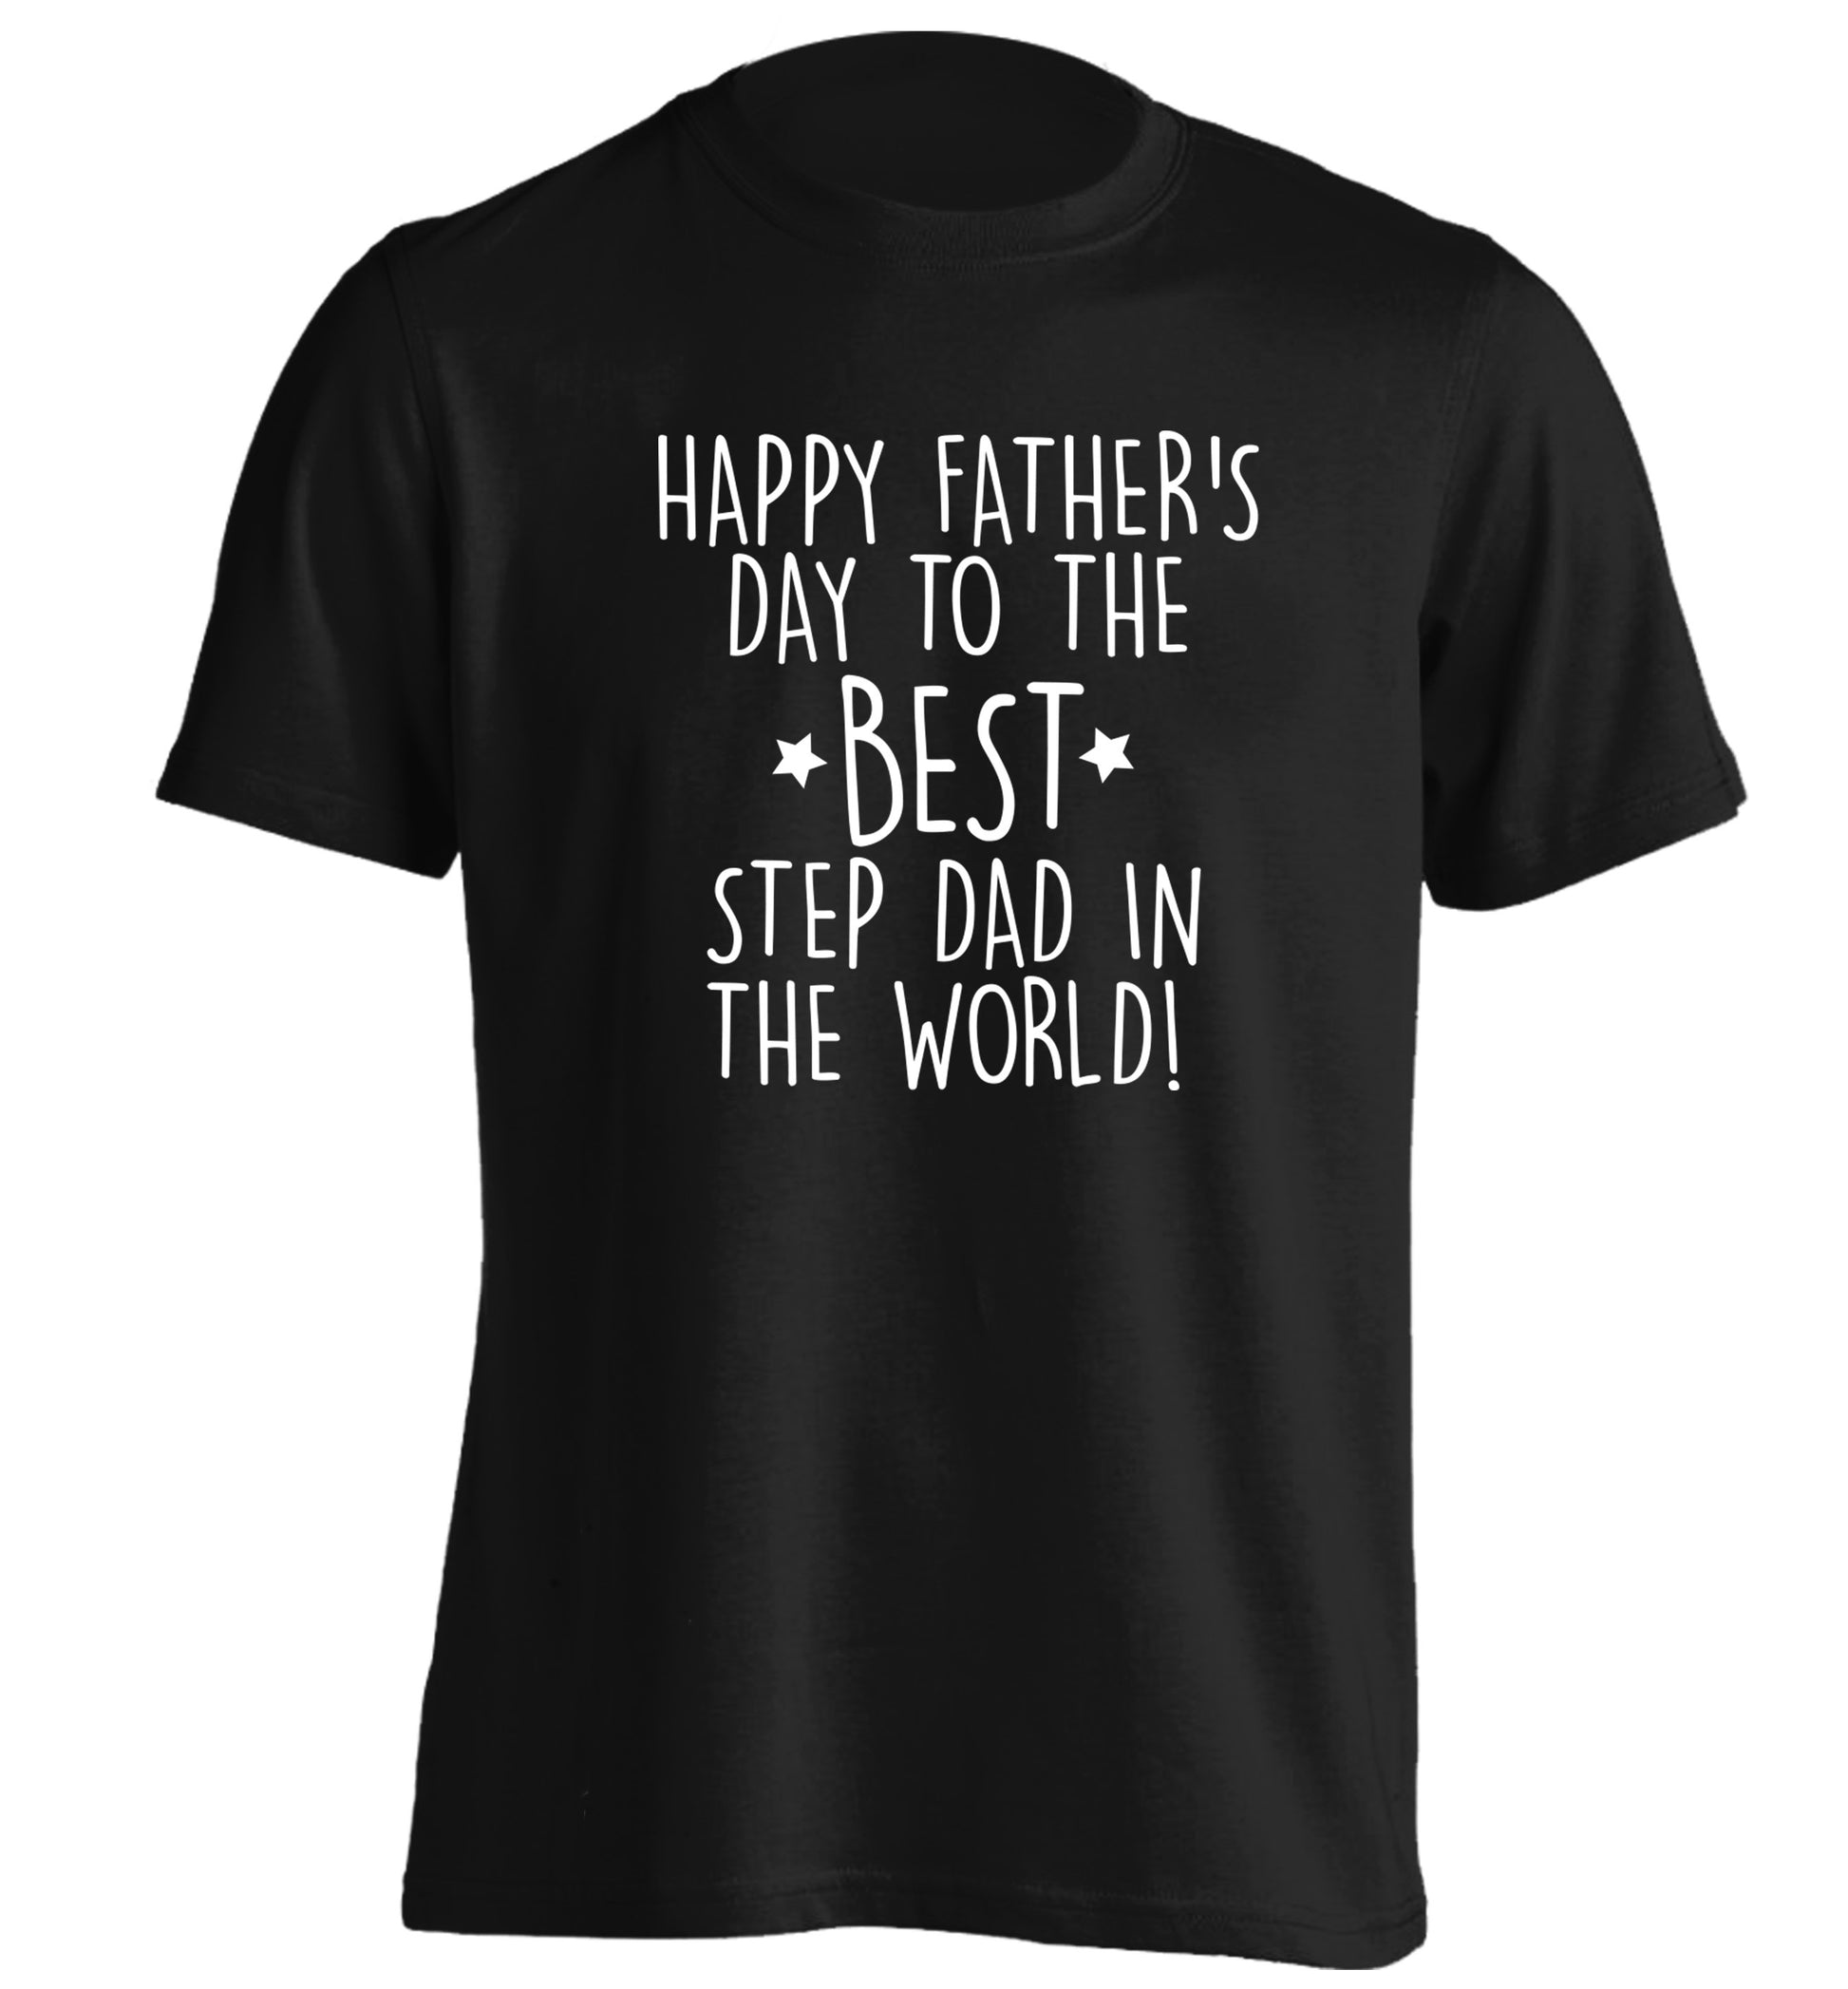 Happy Father's day to the best step dad in the world! adults unisex black Tshirt 2XL